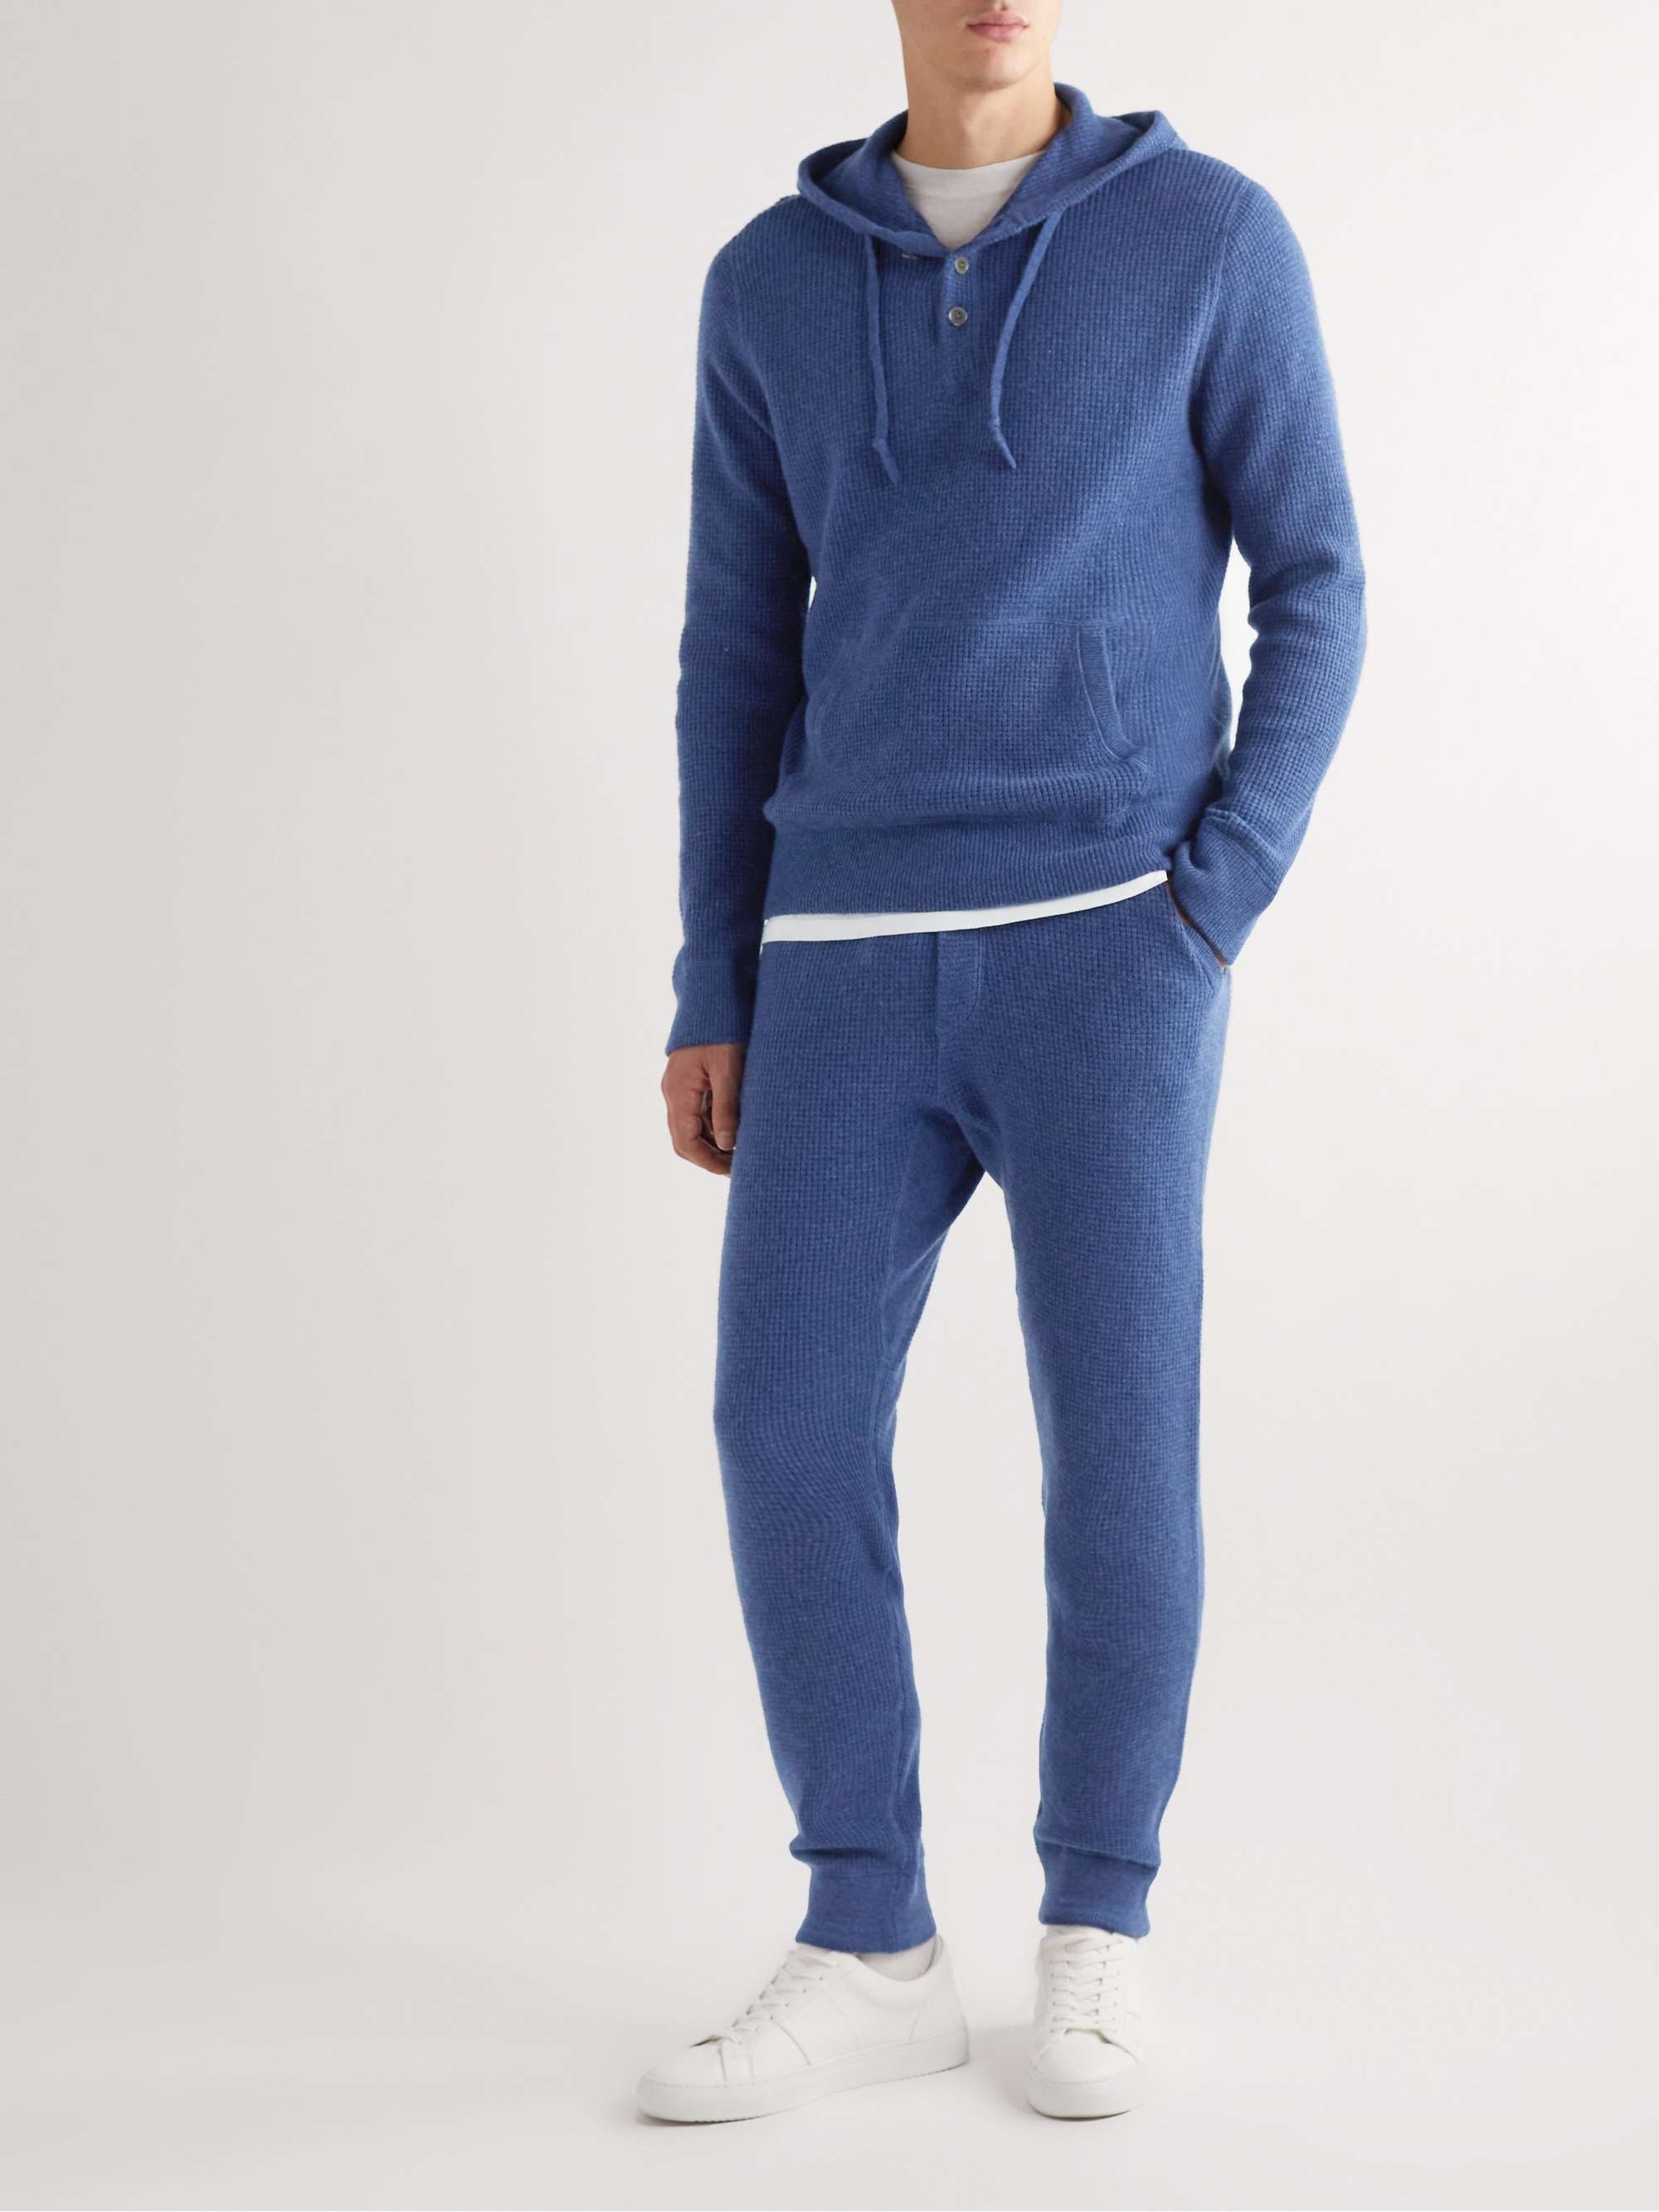 POLO RALPH LAUREN Waffle-Knit Cashmere Hoodie for Men | MR PORTER